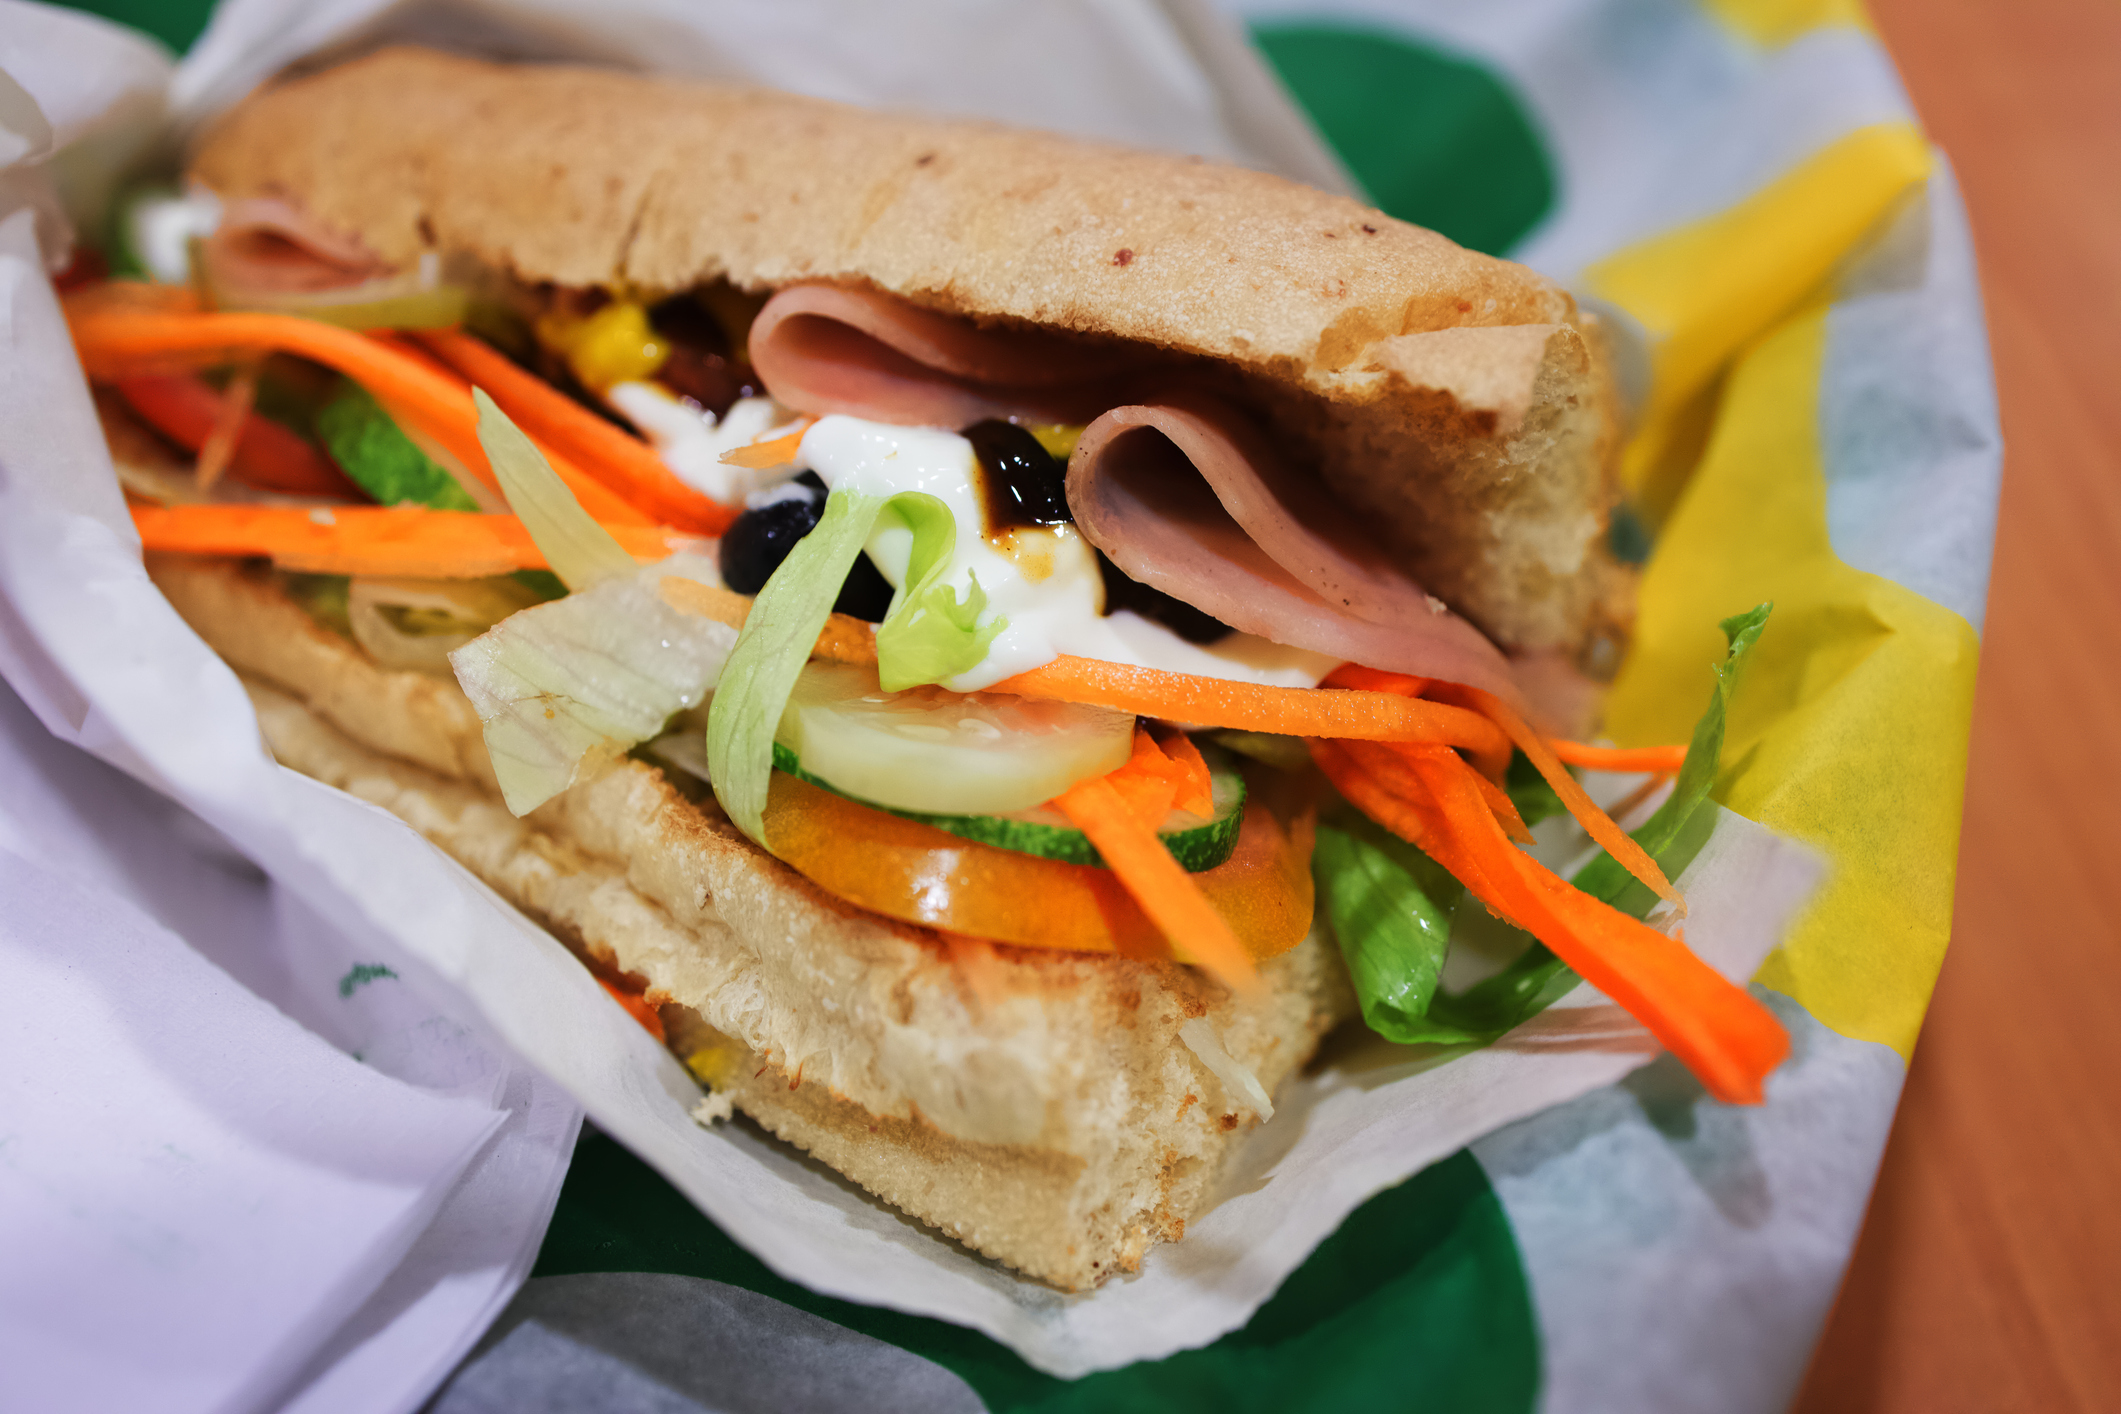 Forget footlongs. Subway now offers a 3-inch sandwich in Pakistan, which is struggling with Asia’s fastest inflation. (Getty Images/iStock)